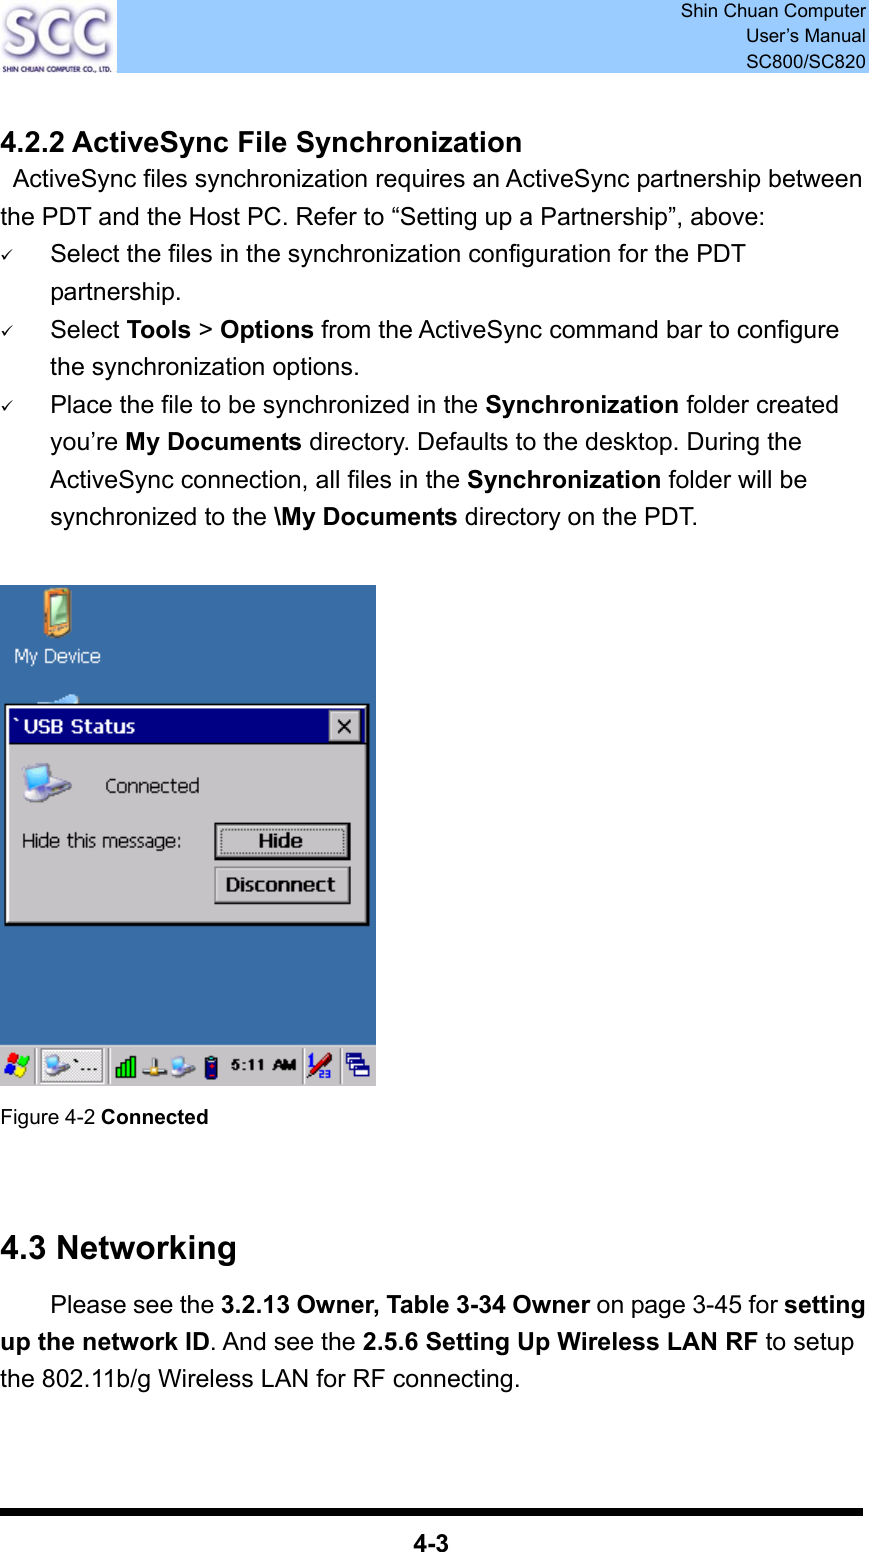  Shin Chuan Computer User’s Manual SC800/SC820  4-3  4.2.2 ActiveSync File Synchronization   ActiveSync files synchronization requires an ActiveSync partnership between the PDT and the Host PC. Refer to “Setting up a Partnership”, above: 9 Select the files in the synchronization configuration for the PDT partnership. 9 Select Tools &gt; Options from the ActiveSync command bar to configure the synchronization options. 9 Place the file to be synchronized in the Synchronization folder created you’re My Documents directory. Defaults to the desktop. During the ActiveSync connection, all files in the Synchronization folder will be synchronized to the \My Documents directory on the PDT.     Figure 4-2 Connected   4.3 Networking     Please see the 3.2.13 Owner, Table 3-34 Owner on page 3-45 for setting up the network ID. And see the 2.5.6 Setting Up Wireless LAN RF to setup the 802.11b/g Wireless LAN for RF connecting.   